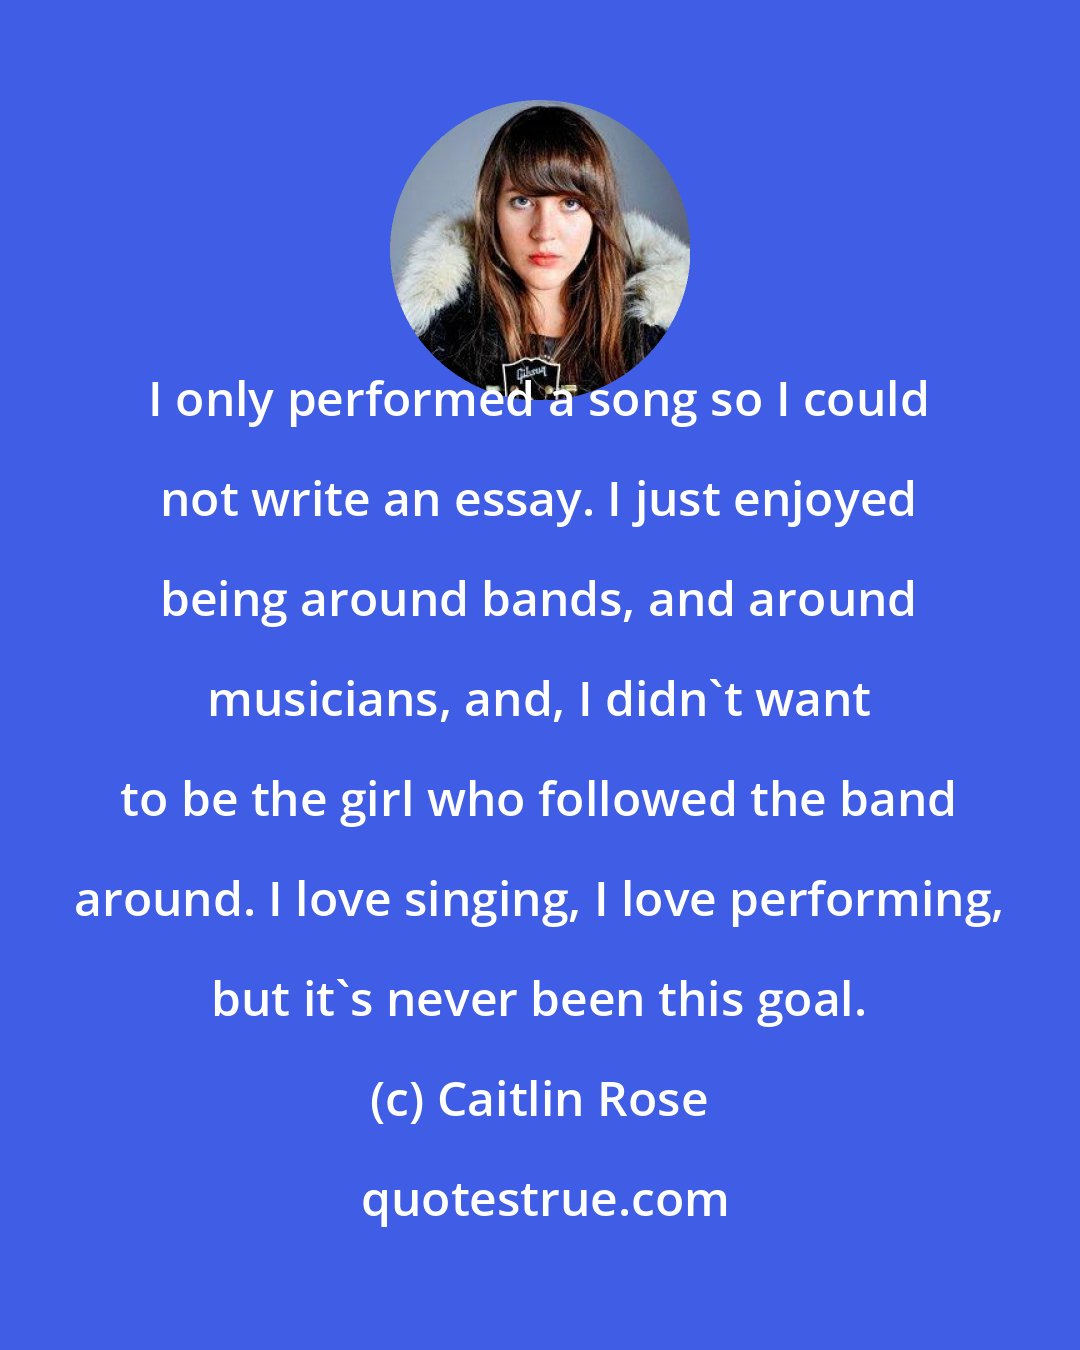 Caitlin Rose: I only performed a song so I could not write an essay. I just enjoyed being around bands, and around musicians, and, I didn't want to be the girl who followed the band around. I love singing, I love performing, but it's never been this goal.